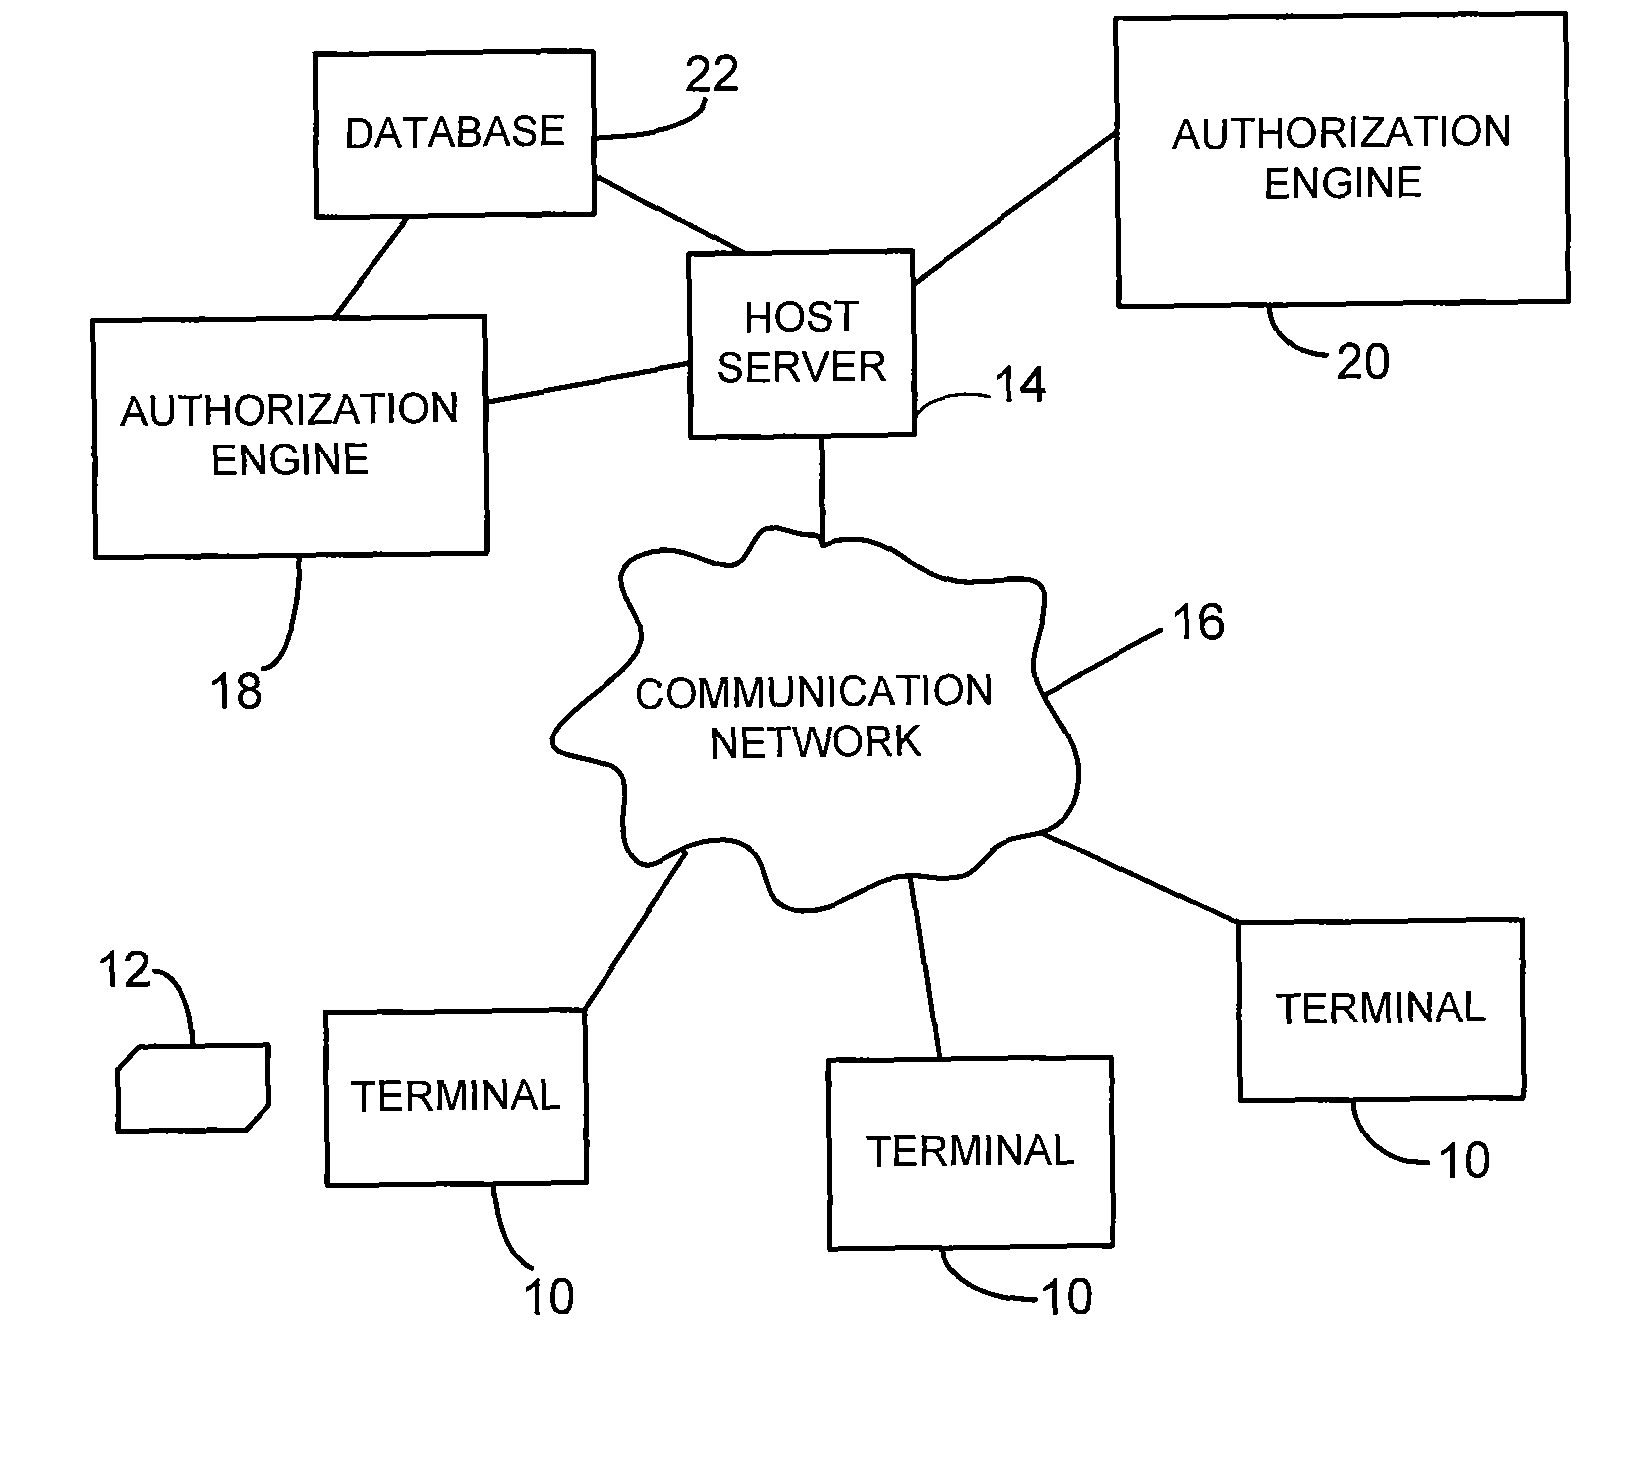 System and method for authorizing electronic payment transactions